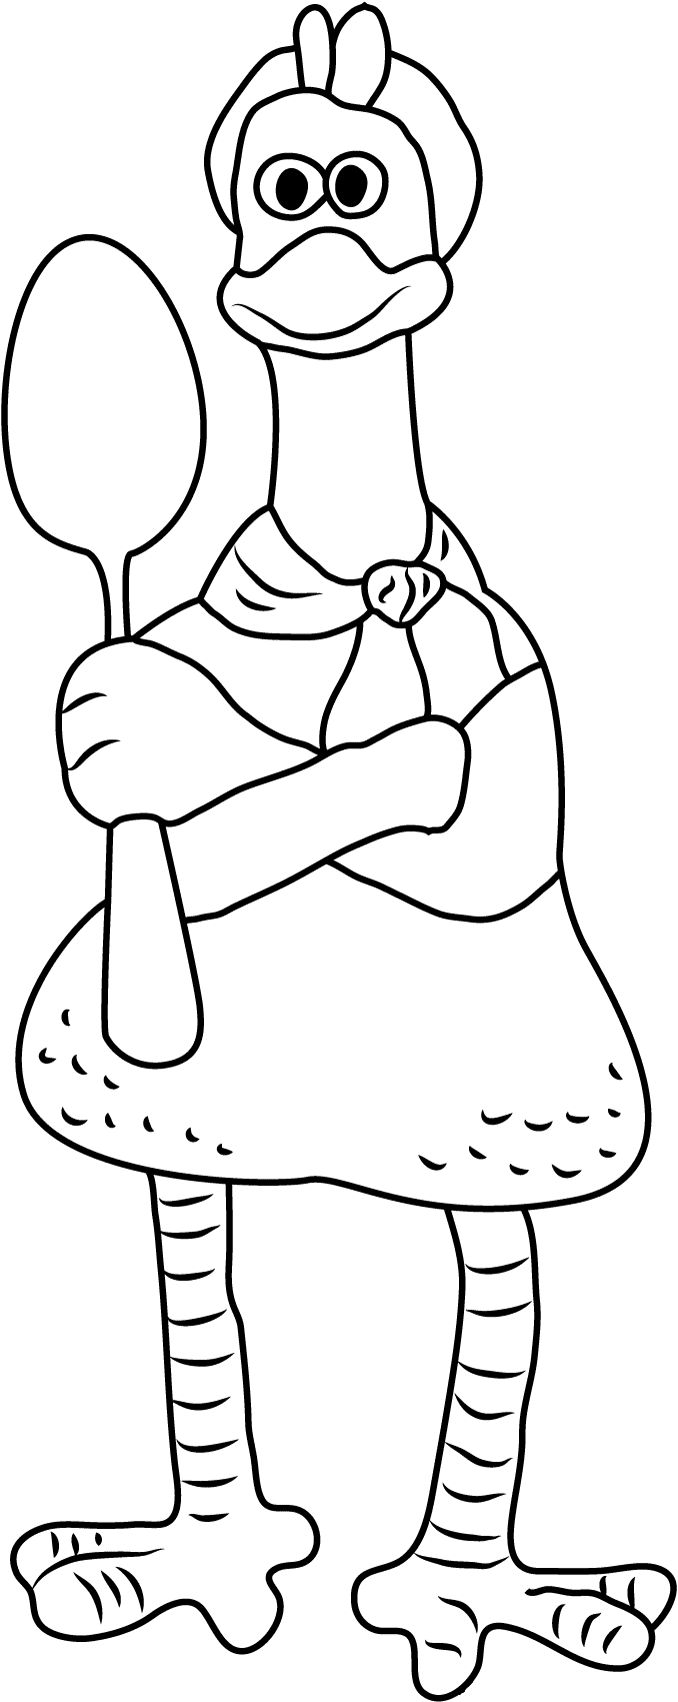 Ginger Holding Spoon Coloring Page